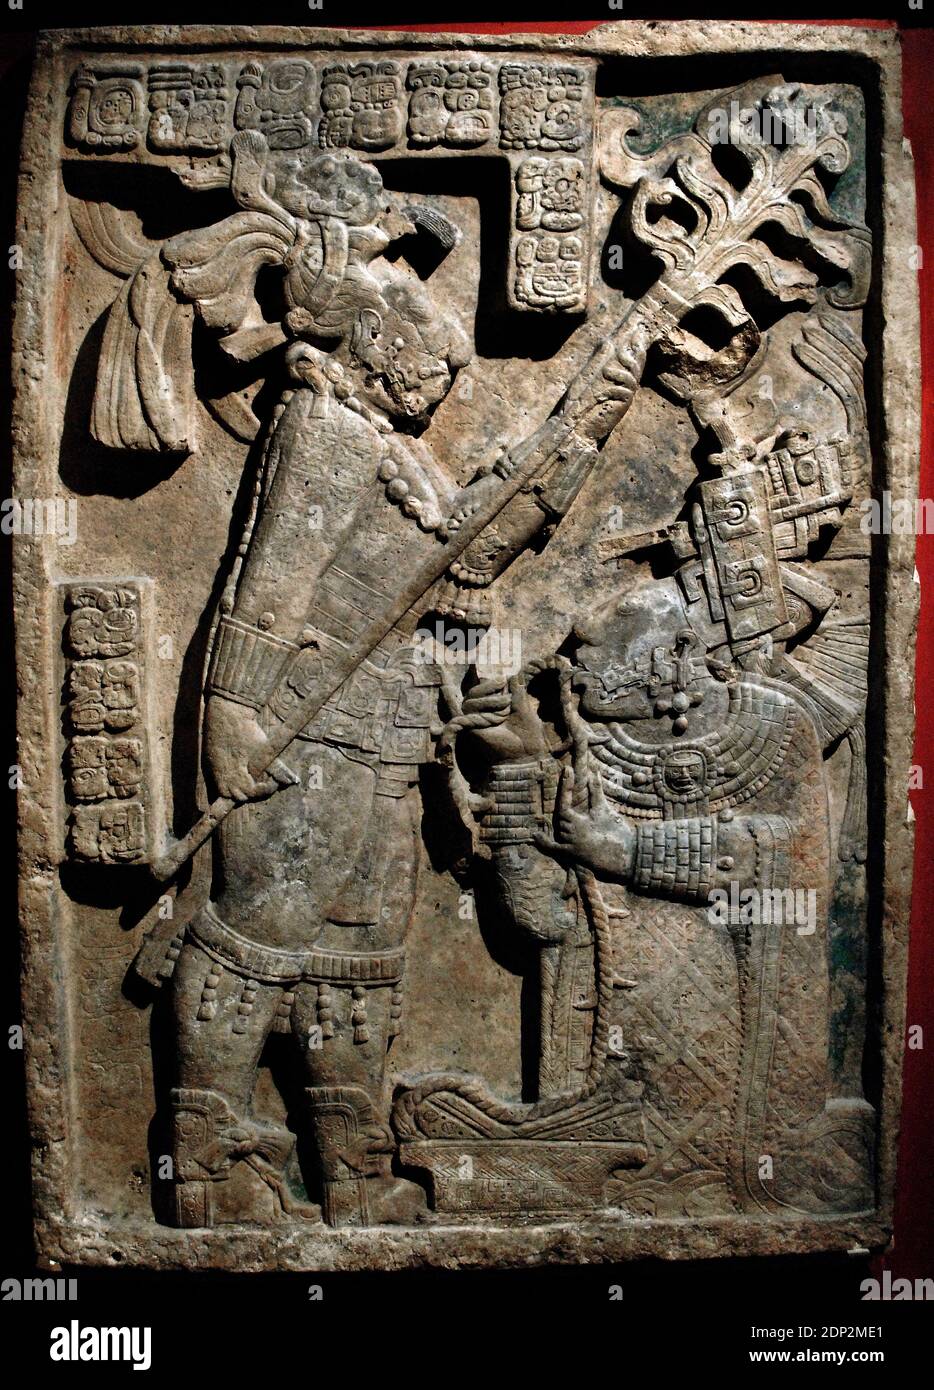 The Yaxchilan Lintels. Lintel 24. Structure 23. Carved limestone lintel. Depiction of a bloodletting ritual performed by the king of Yaxchilan, Shield Jaguar II and his wife, Lady K'ab'al Xook. The king holds a flaming torch over his wife, who is pulling a thorny rope through her tongue. Scrolls of blood can be seen around her mouth. Classic Maya. 723-726. Limestone. Yaxchilan, Chiapas, Mexico. British Museum. London, England, United Kingdom. Stock Photo